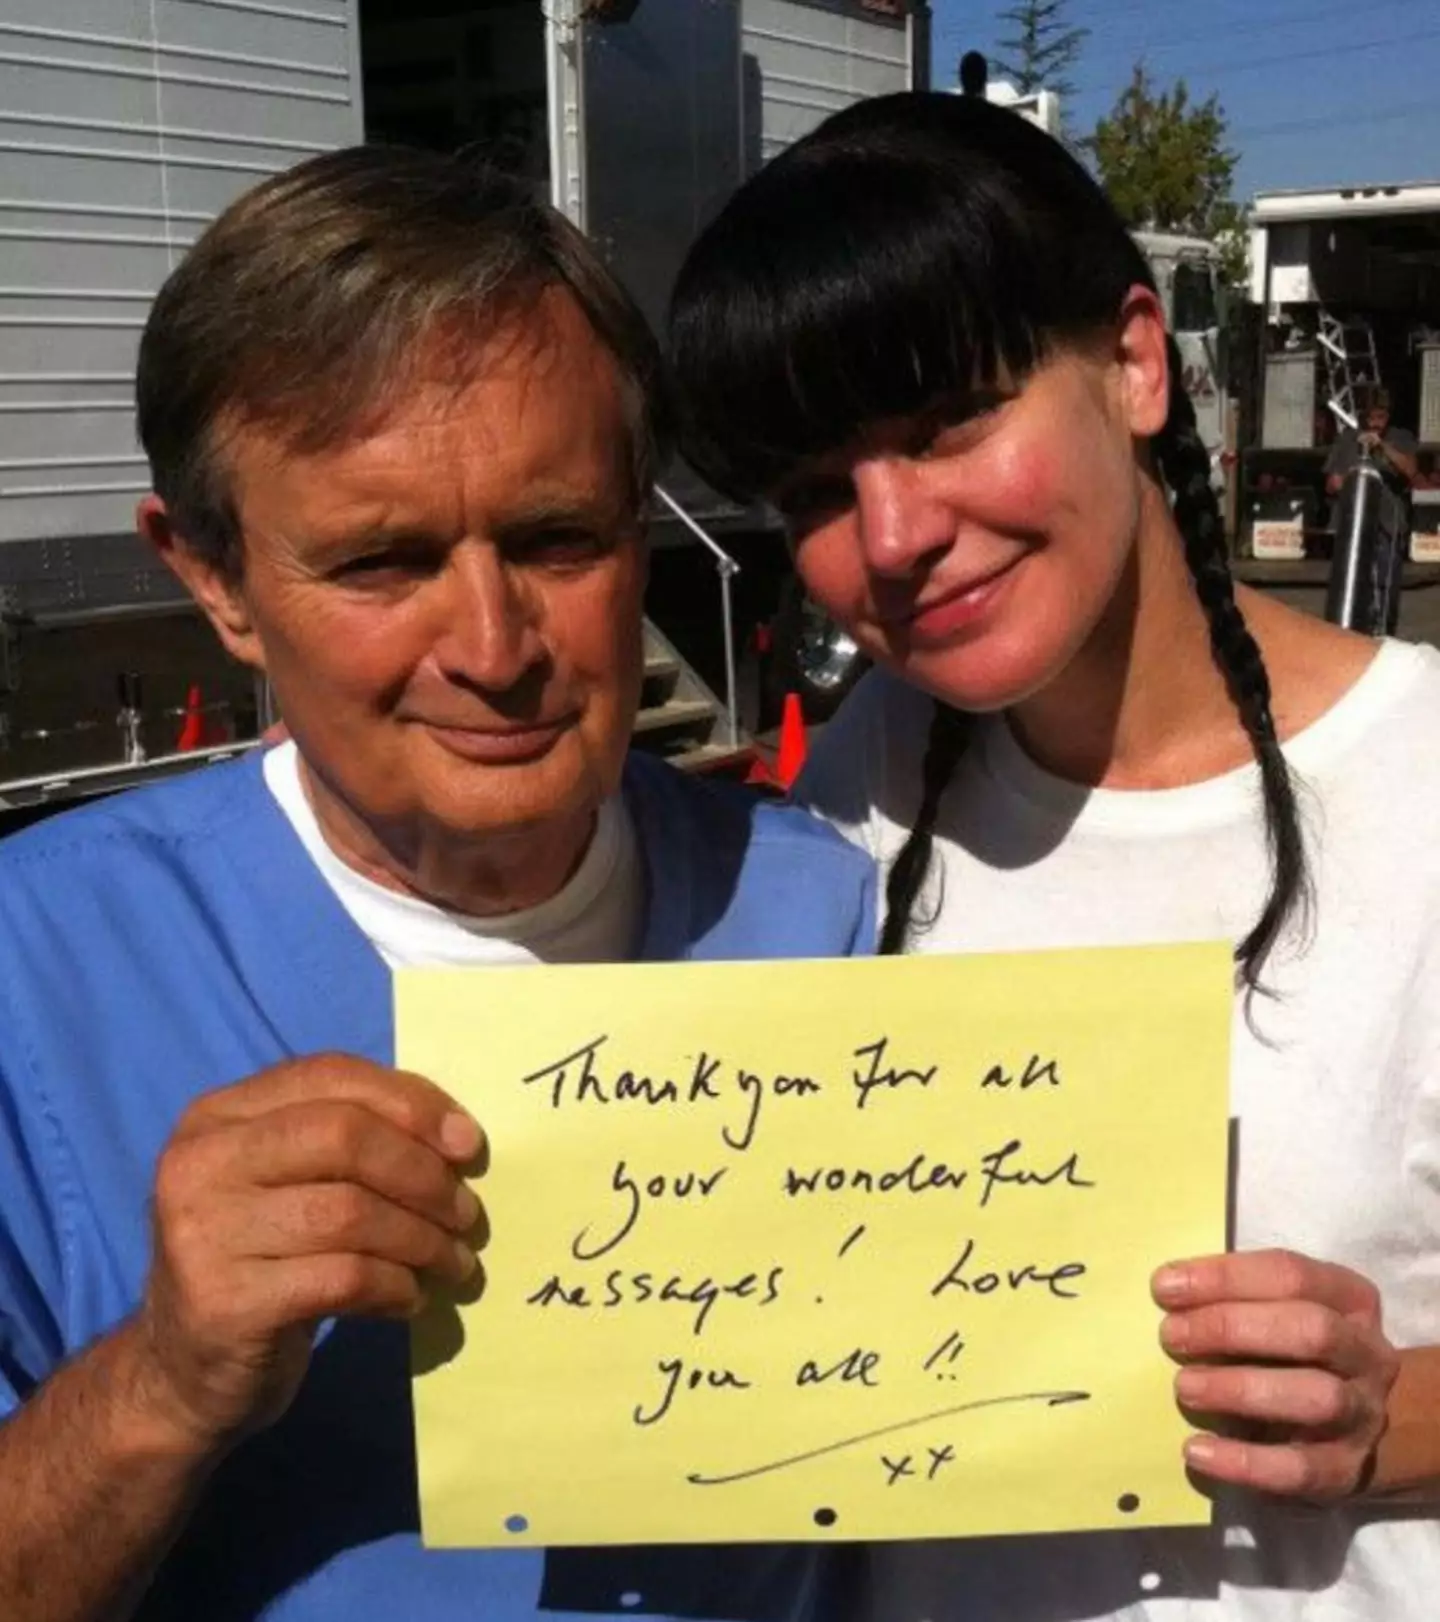 Pauley Perrette paid tribute to her co-star on Instagram.